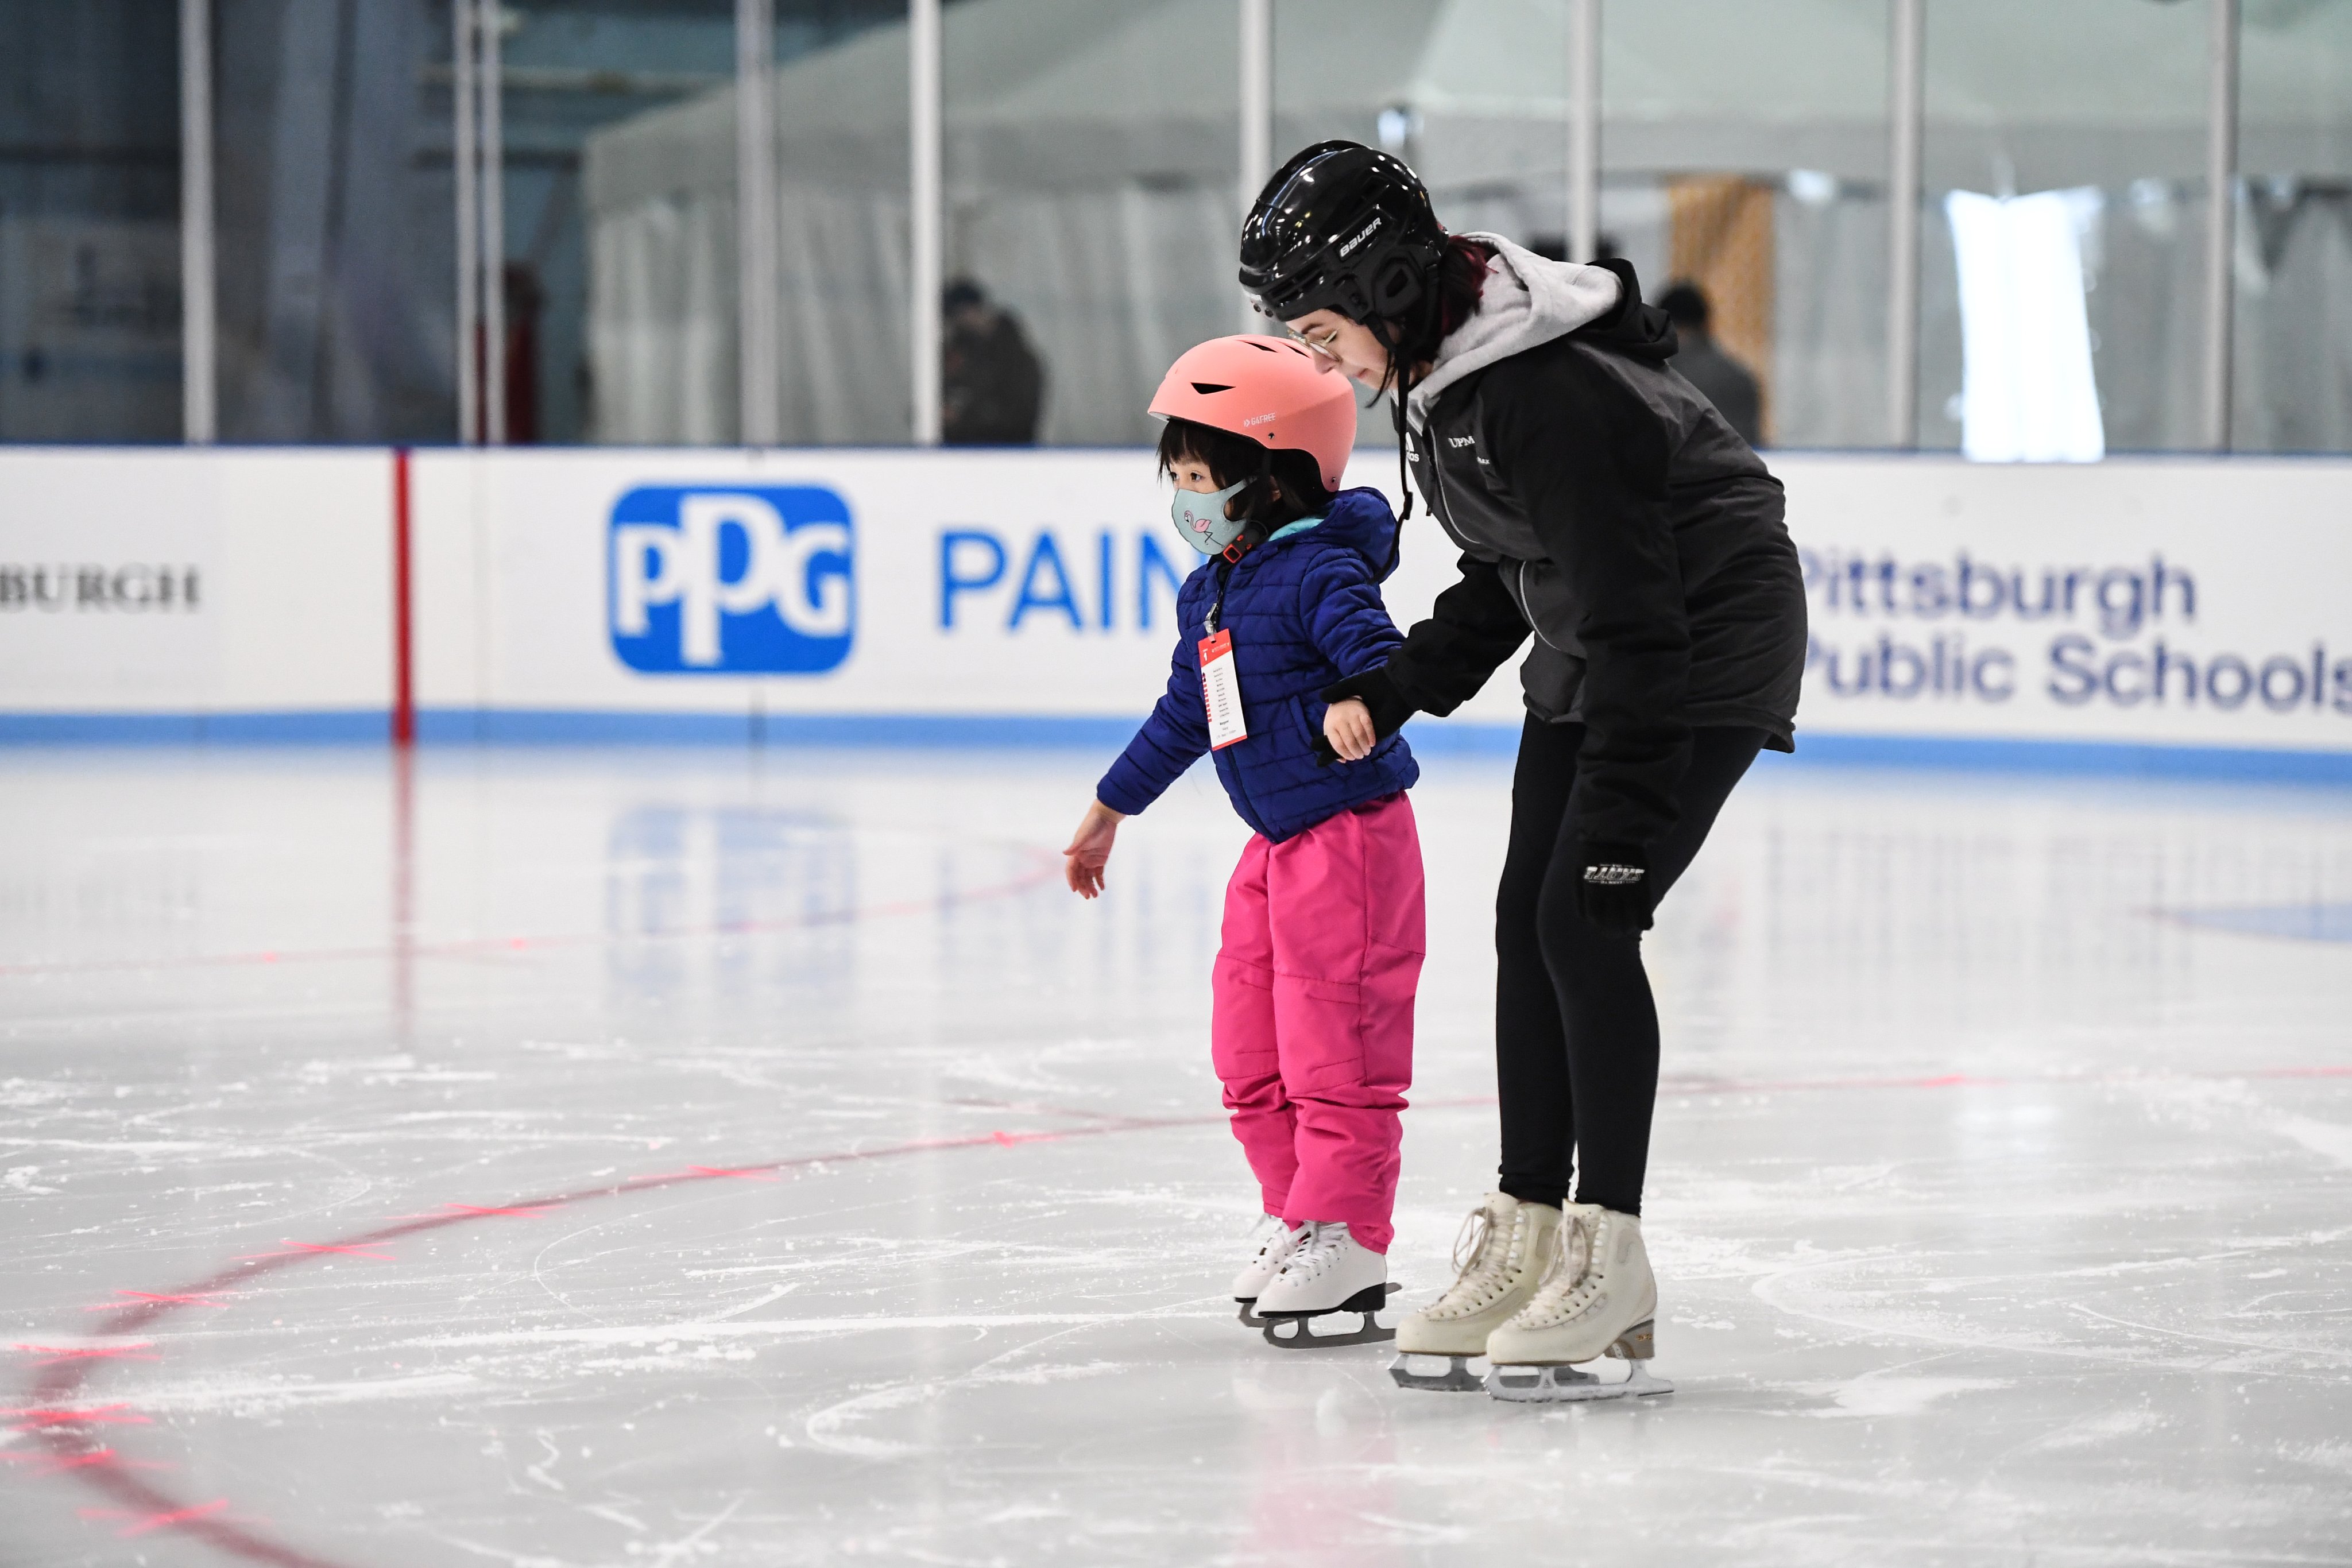 Pittsburgh Penguins plan to launch hockey diversity program, public ice  rink in Shadyside - Pittsburgh Business Times